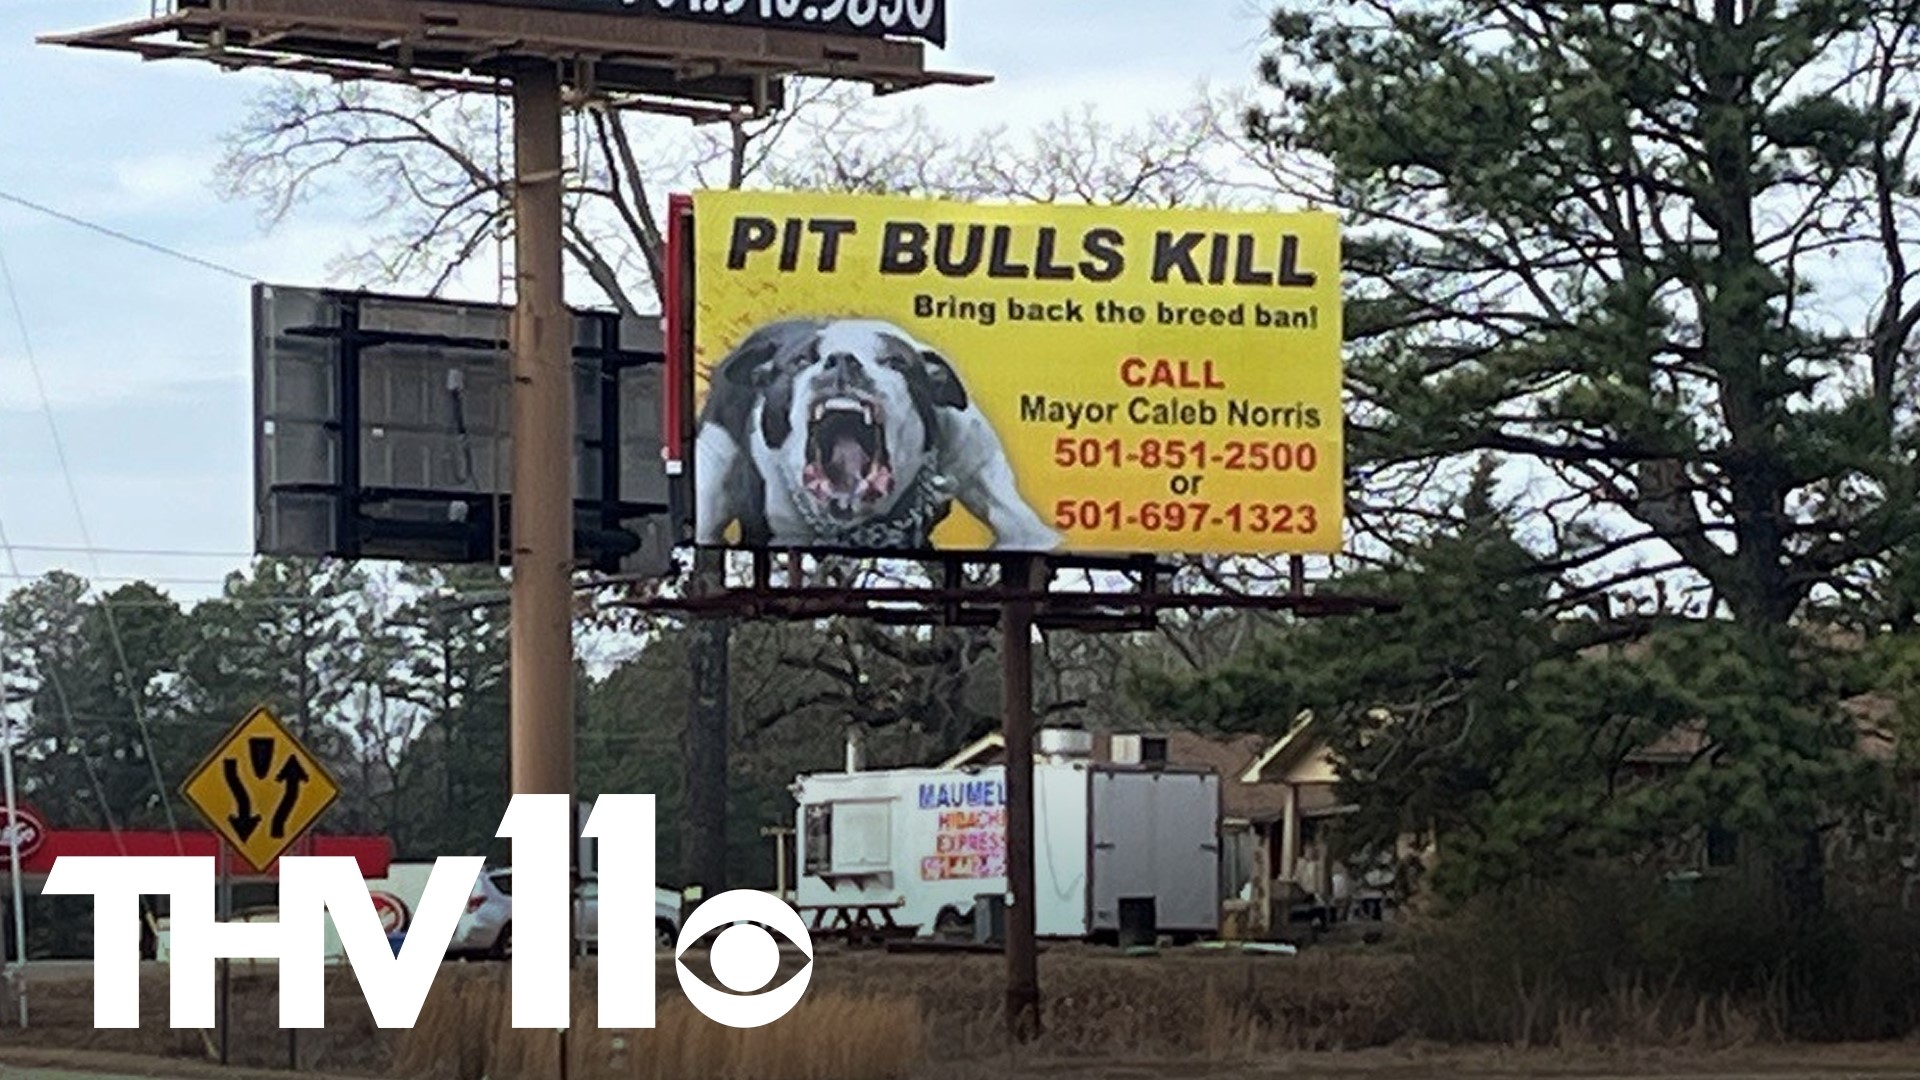 The discussion to ban pit bulls is back in the spotlight after a billboard in Maumelle asks the city to reinstate the ban, which it lifted back in 2021.